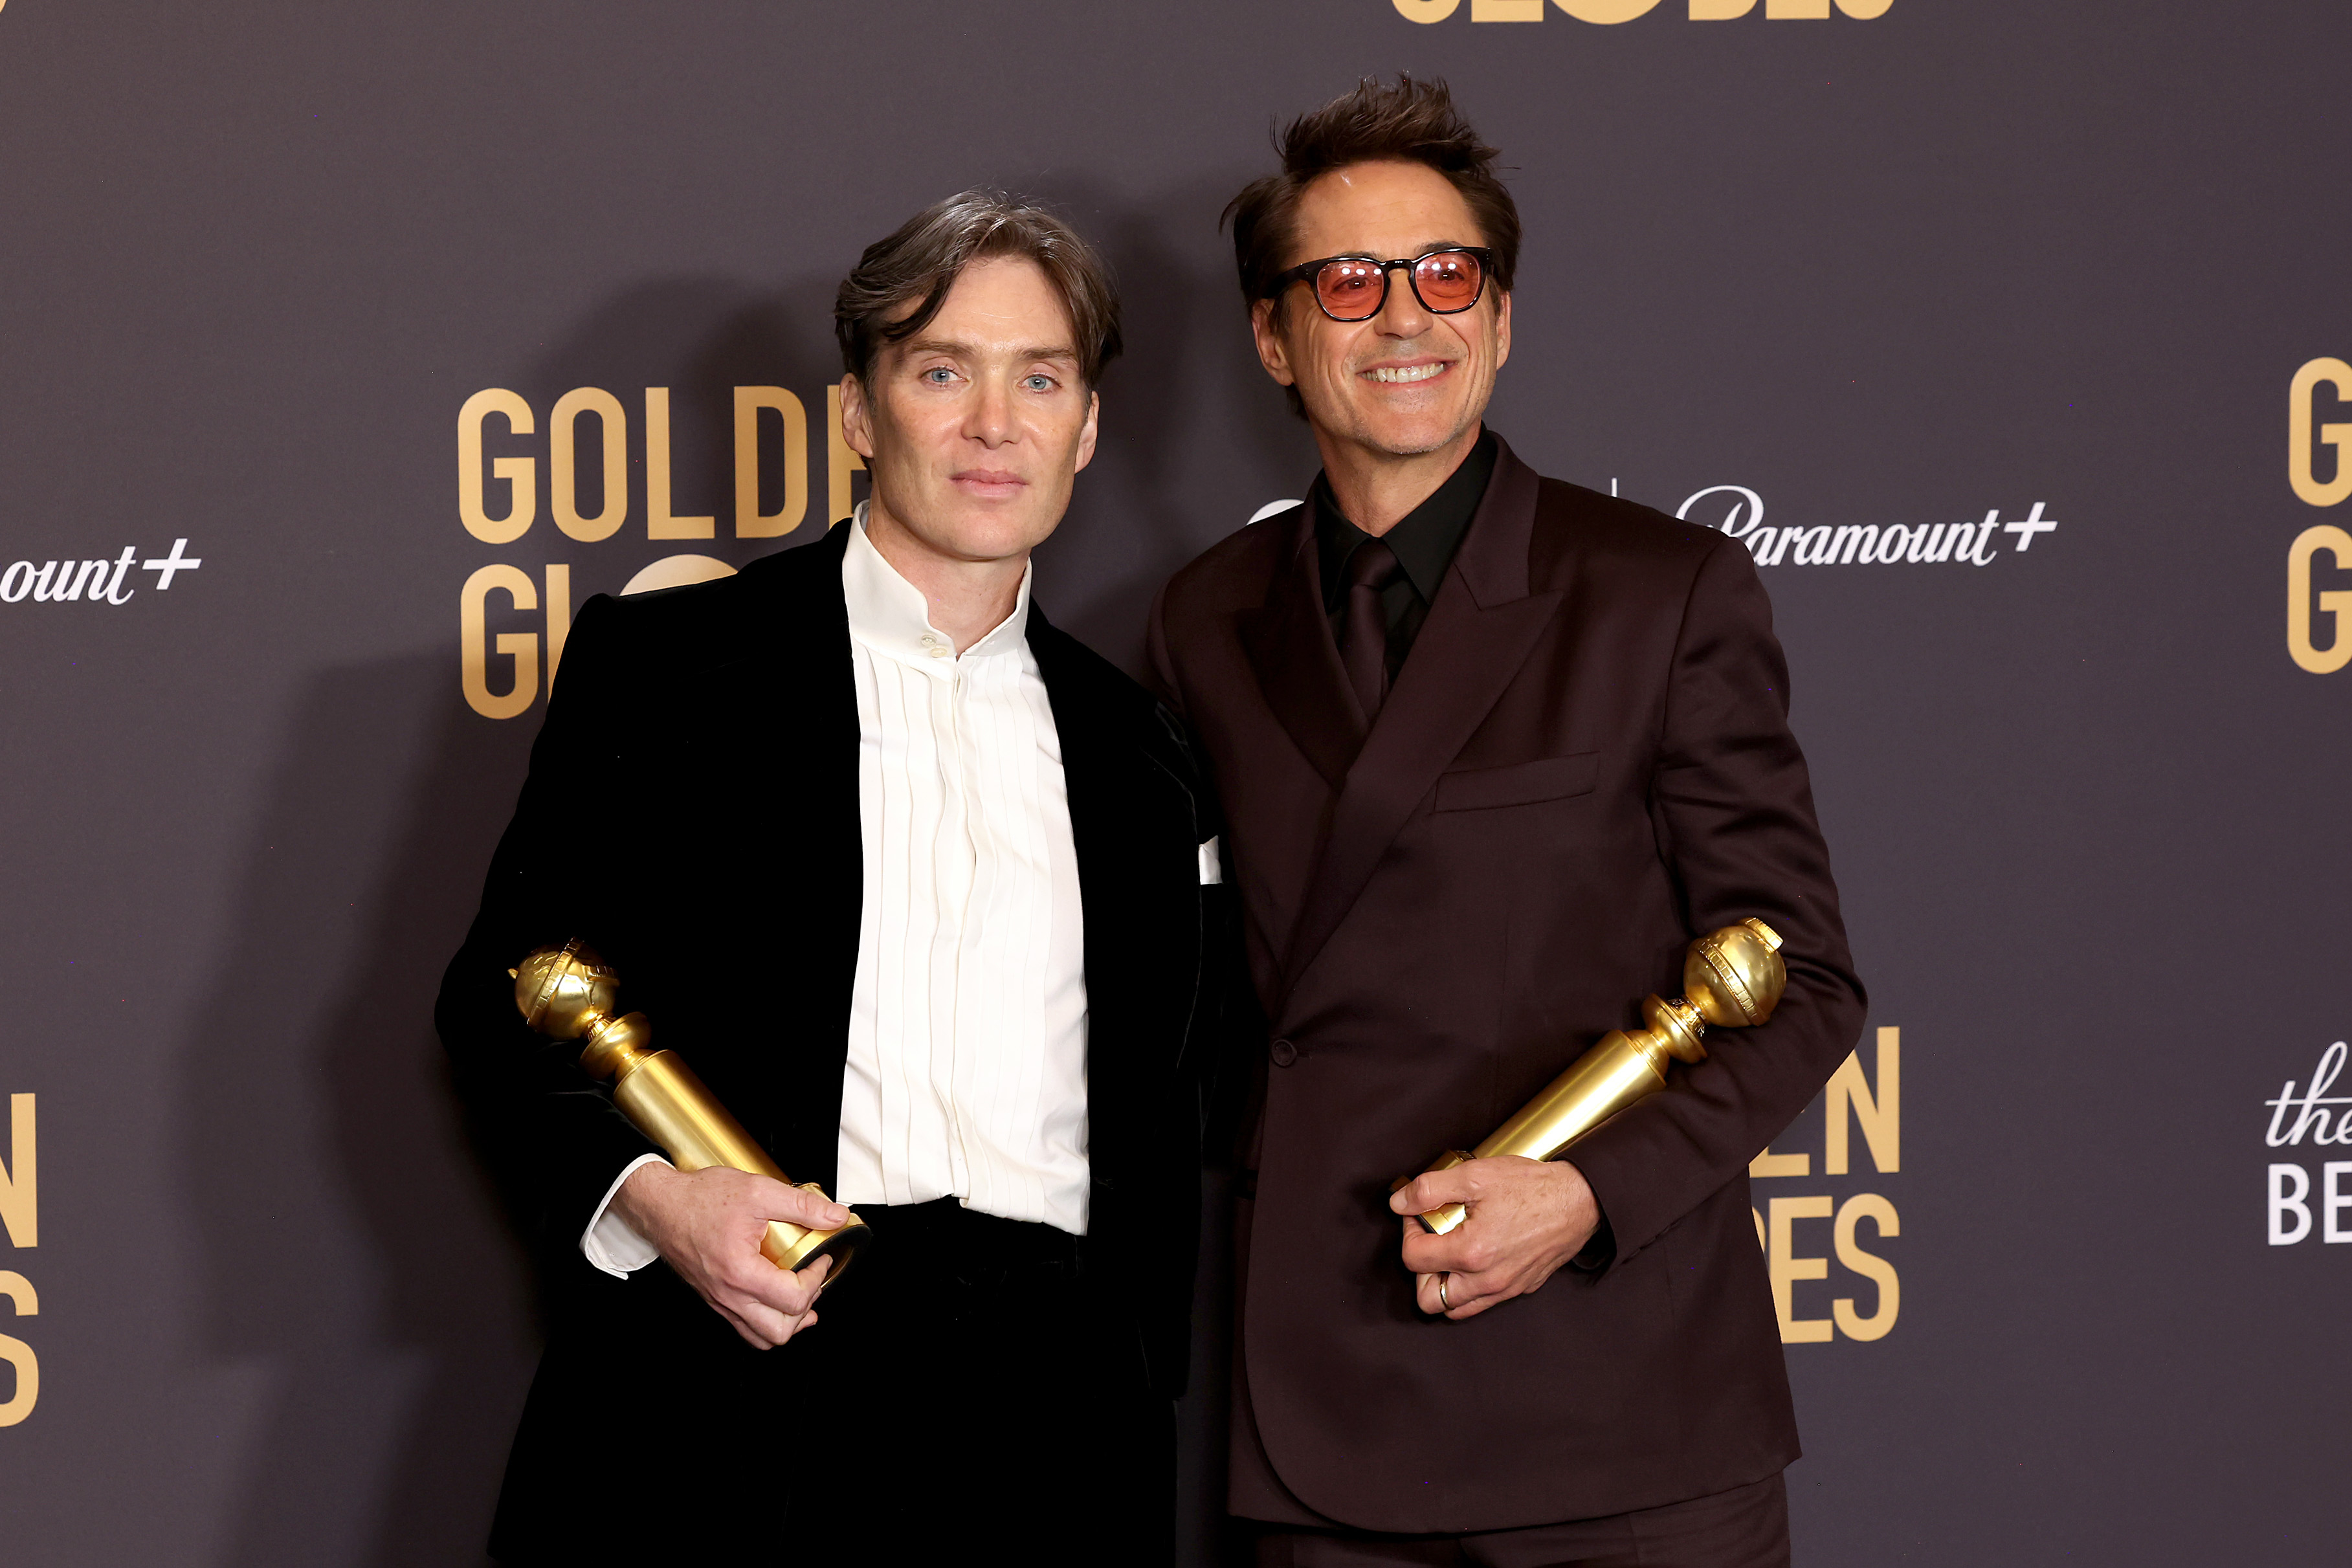 Cillian Murphy and Robert Downey Jr. pose for photos backstage as they hold their individual awards